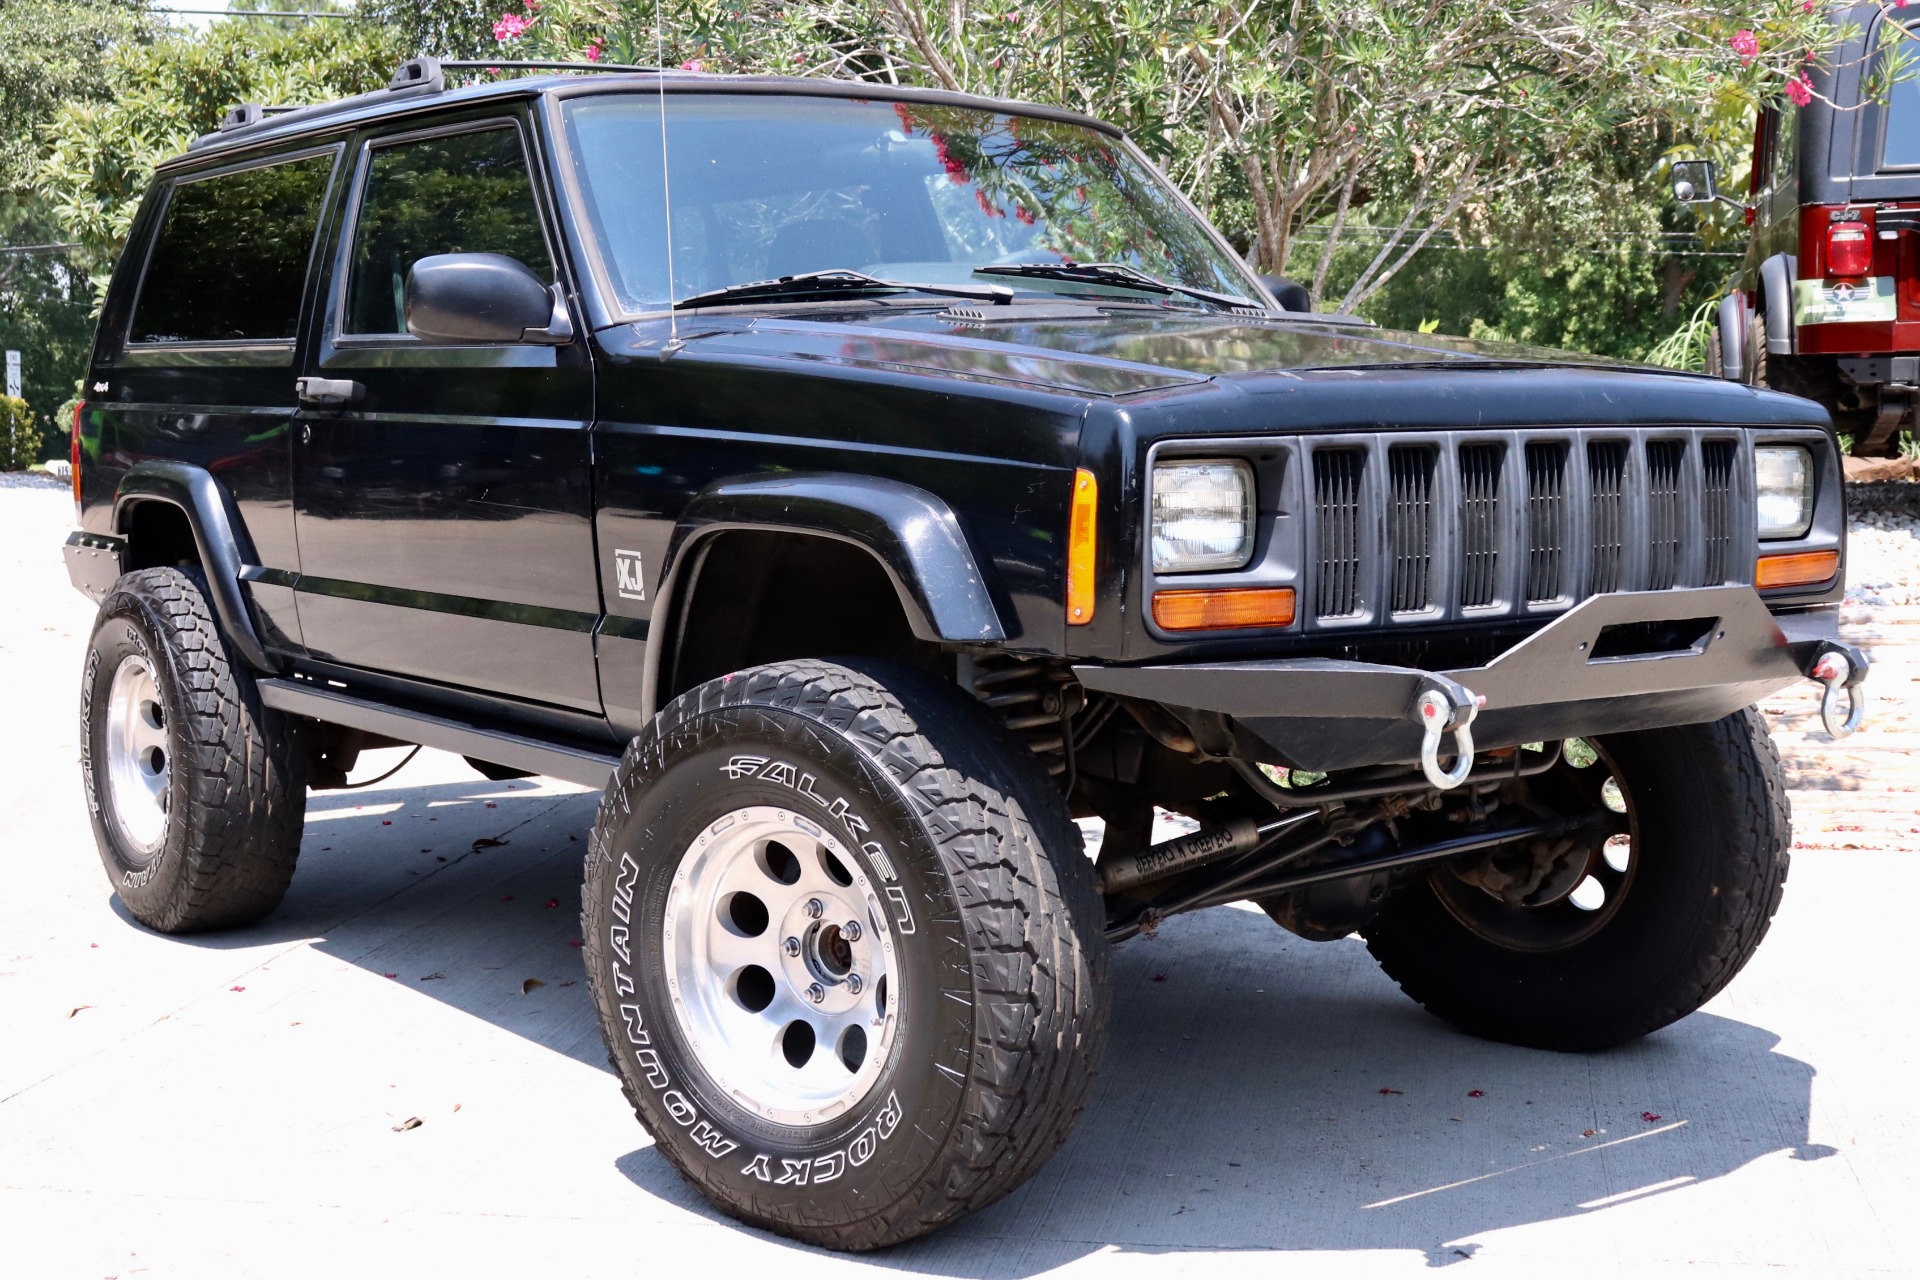 Used 2000 Jeep Cherokee 2dr Sport 4WD For Sale 6 995 Select Jeeps 